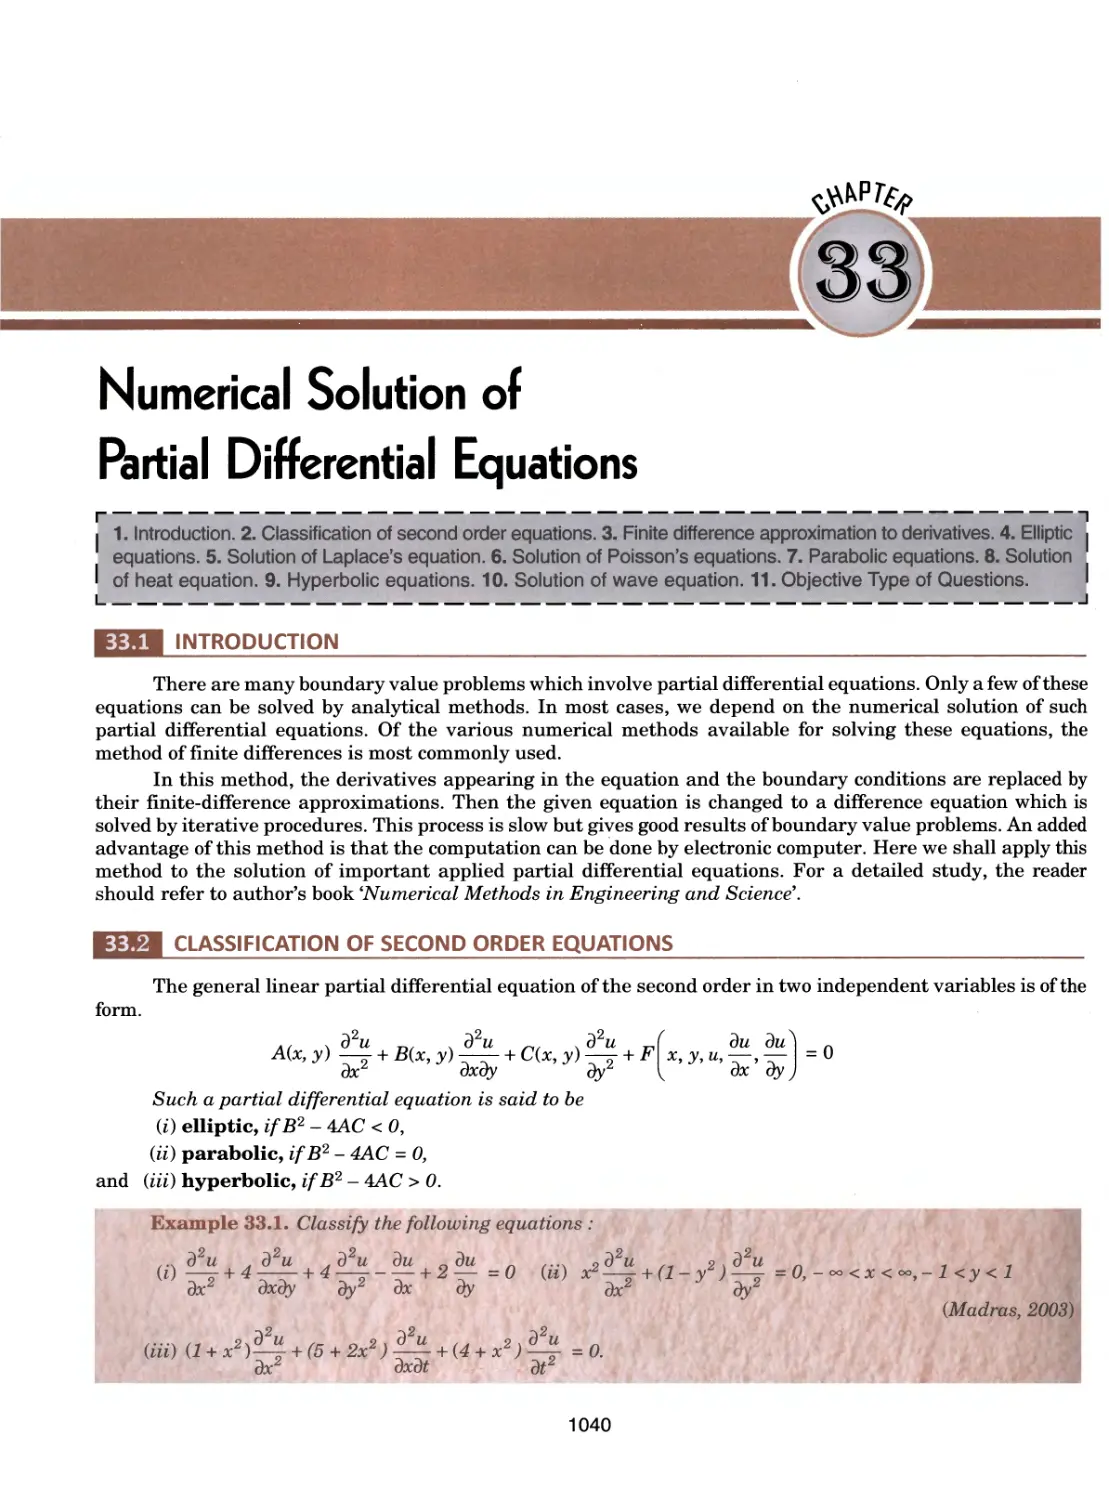 33.Numerical Solution of Partial Differential Equations 1040